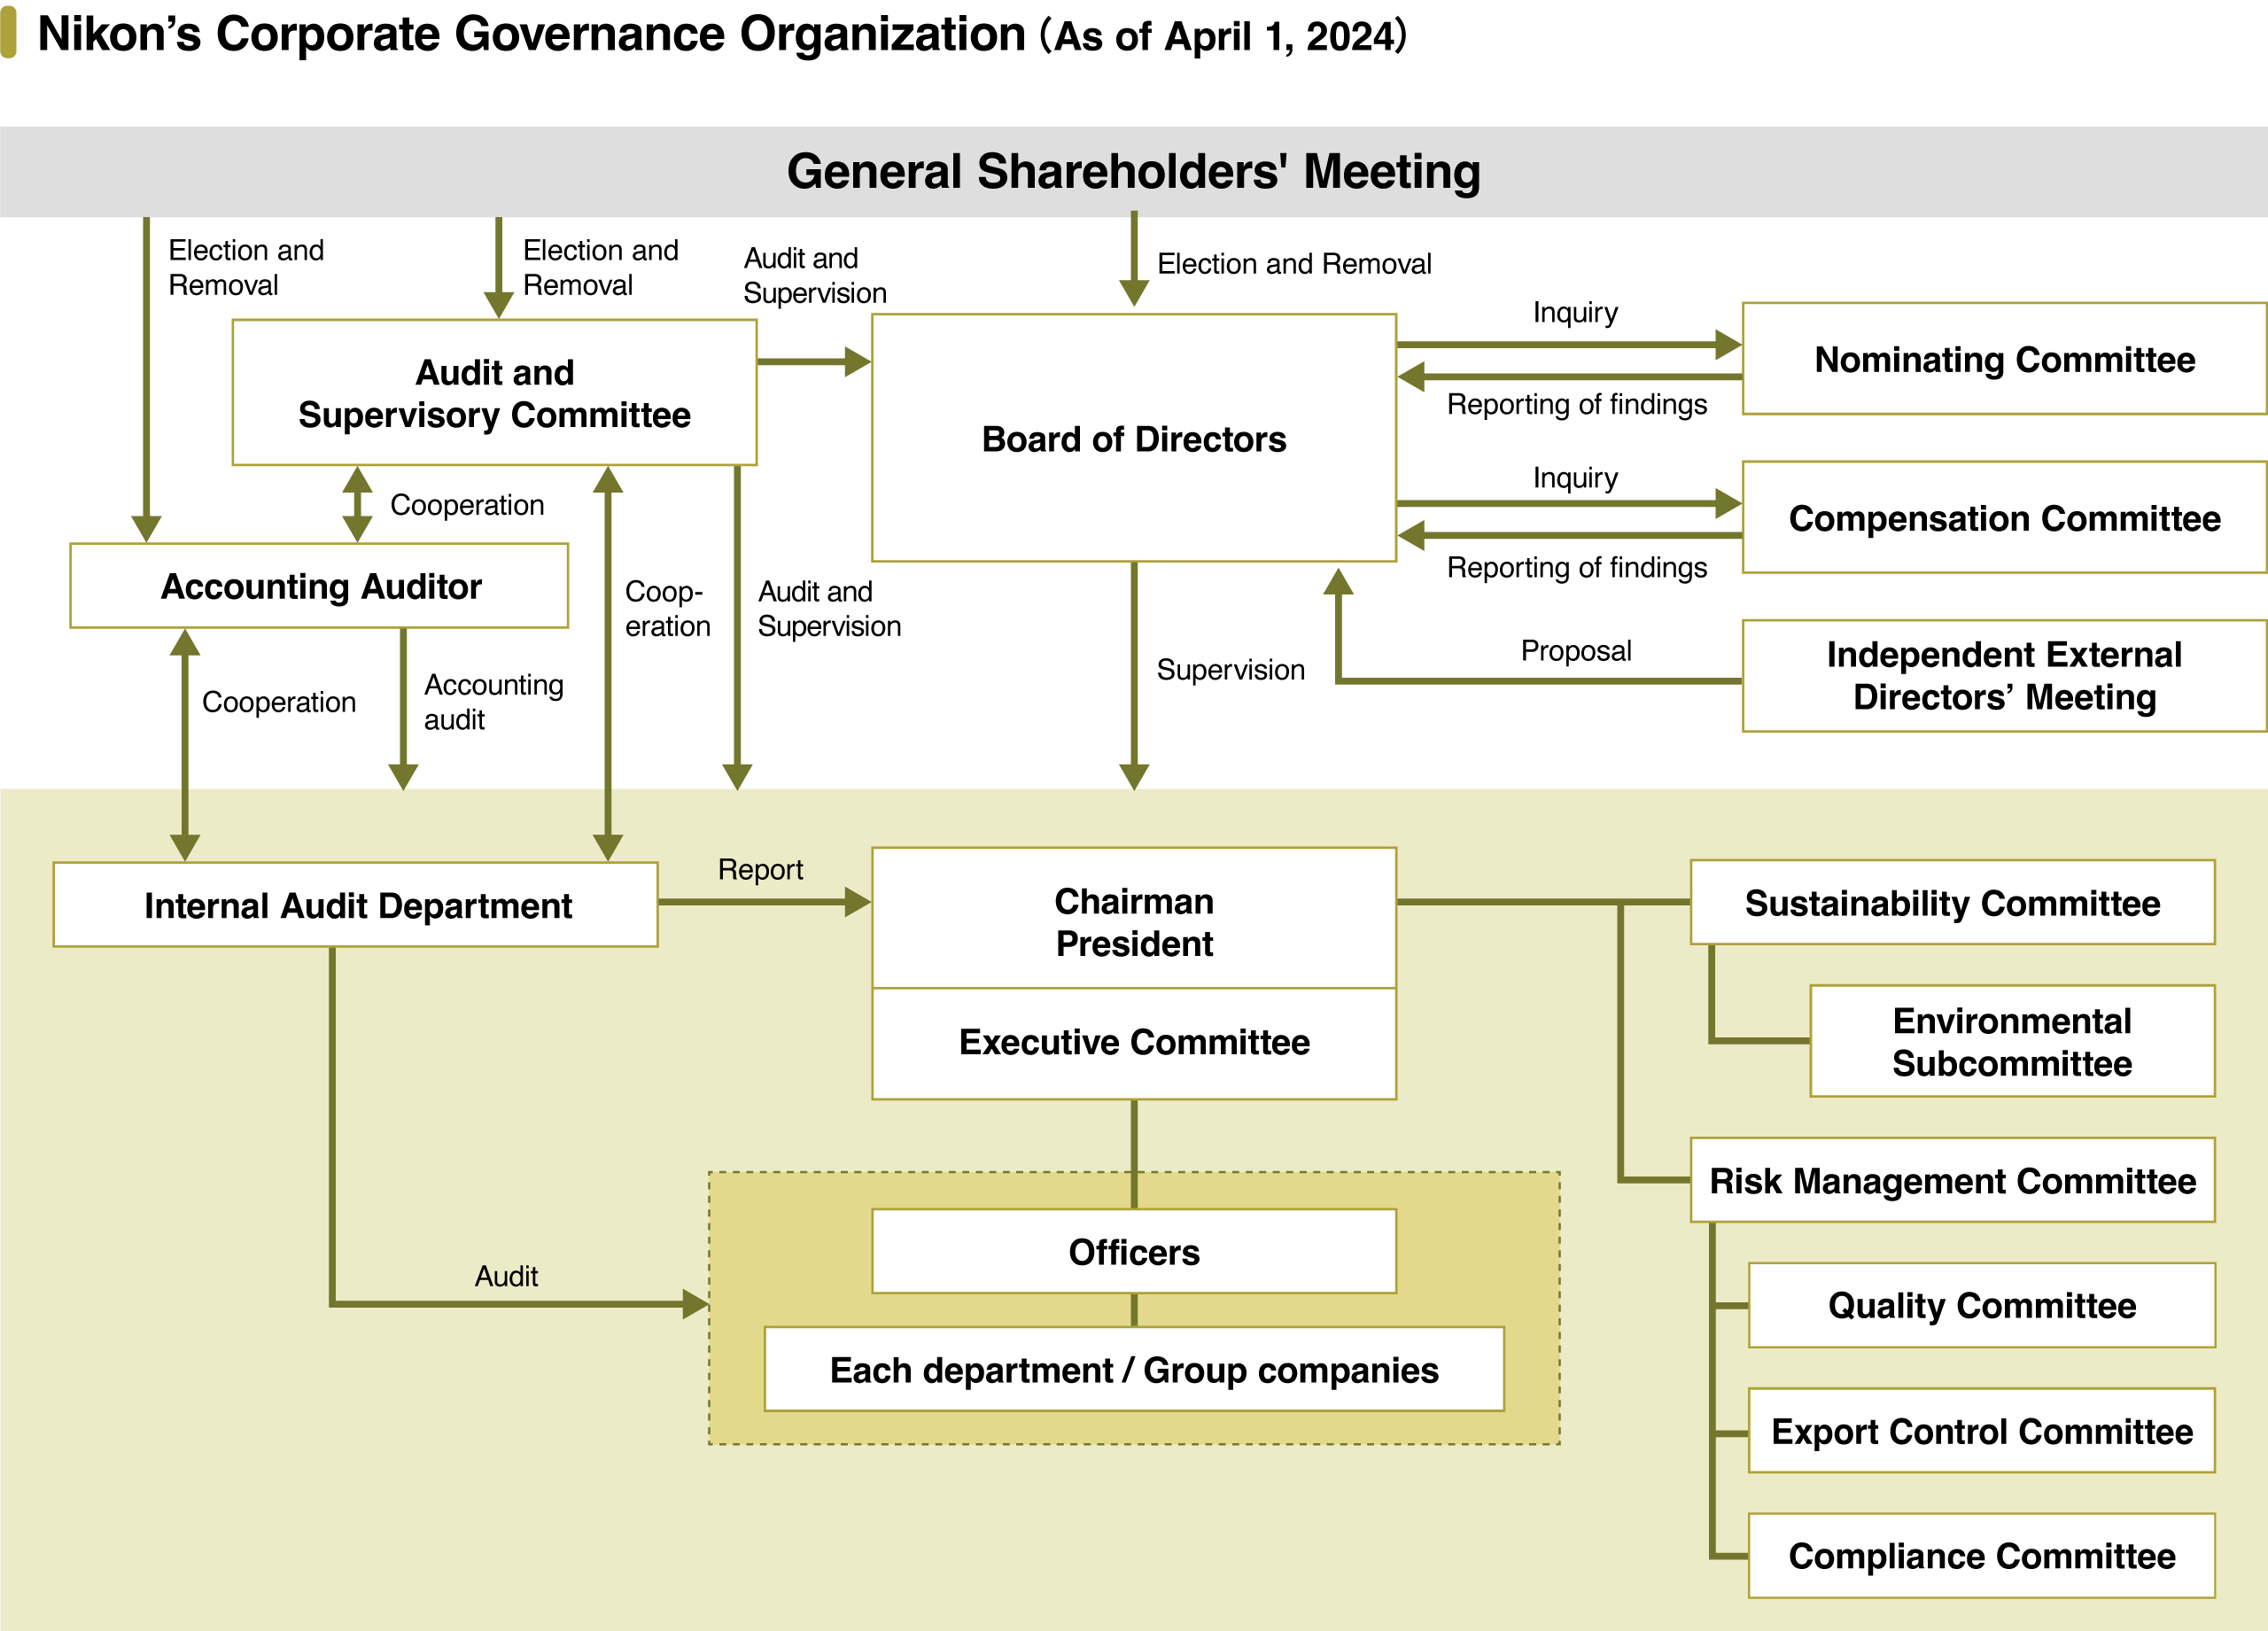 Nikon's Corporate Governance Organization System (As of April 1, 2024): The General Shareholders' Meeting elects and removes directors, Audit and Supervisory Committee members, and the Accounting Auditor. The Board of Directors submits inquiries to the Nominating Committee and the Compensation Committee, and they report their findings to the Board of Directors. The Independent External Directors' Meeting submits proposals to the Board of Directors. The Board of Directors also supervises the Executive Committee and various other committees etc., including the Sustainability Committee. The Audit and Supervisory Committee audits and supervises the Board of Directors, the Executive Committee and various other committees etc., including the Sustainability Committee, and cooperates with the Accounting Auditor and the Internal Audit Department. The Accounting Auditor audits the Executive Committee and various other committees etc., including the Sustainability Committee, and cooperates with the Internal Audit Department. The Internal Audit Department reports to the Chairman and President, Executive Committee, and audits officers and departments/group companies. The Sustainability Committee and the Risk Management Committee are under the control of the Chairman and President, and the Environmental Subcommittee is under the control of the Sustainability Committee. The Quality Committee, Export Control Committee and Compliance Committee are under the control of the Risk Management Committee.